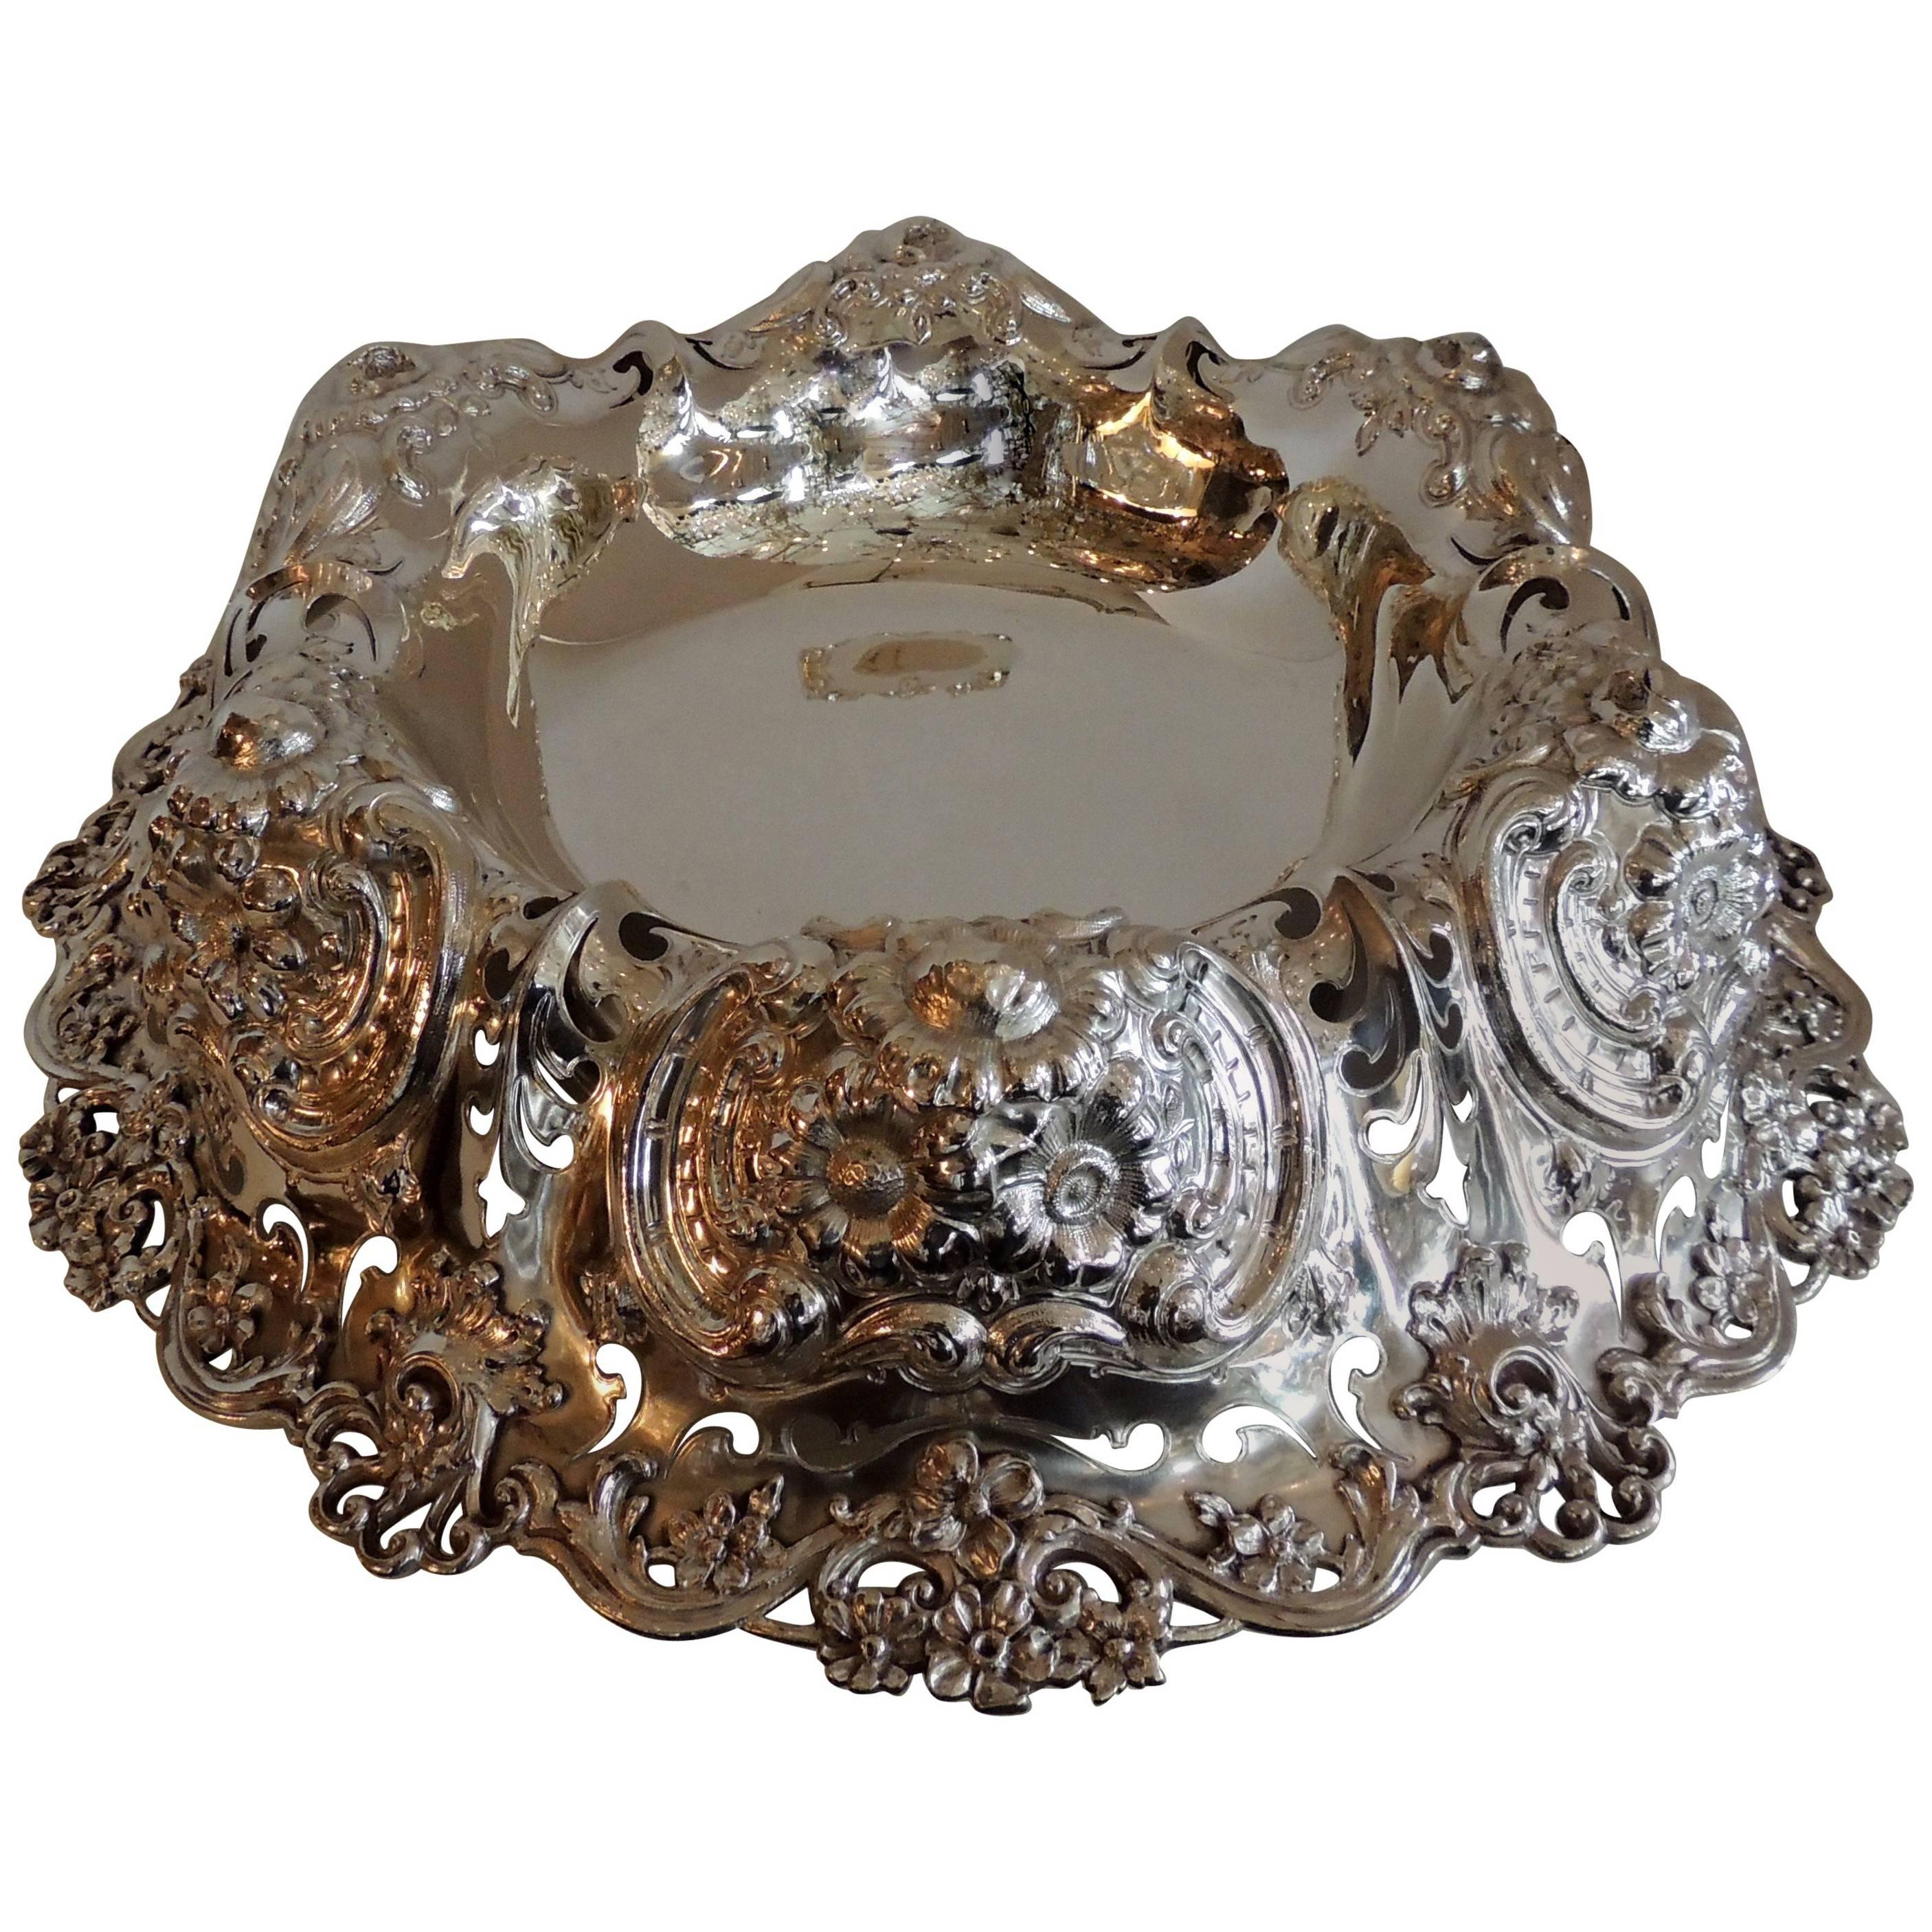 Monumental Sterling Silver Whiting Pierced Blown Out Flower Centerpiece Bowl